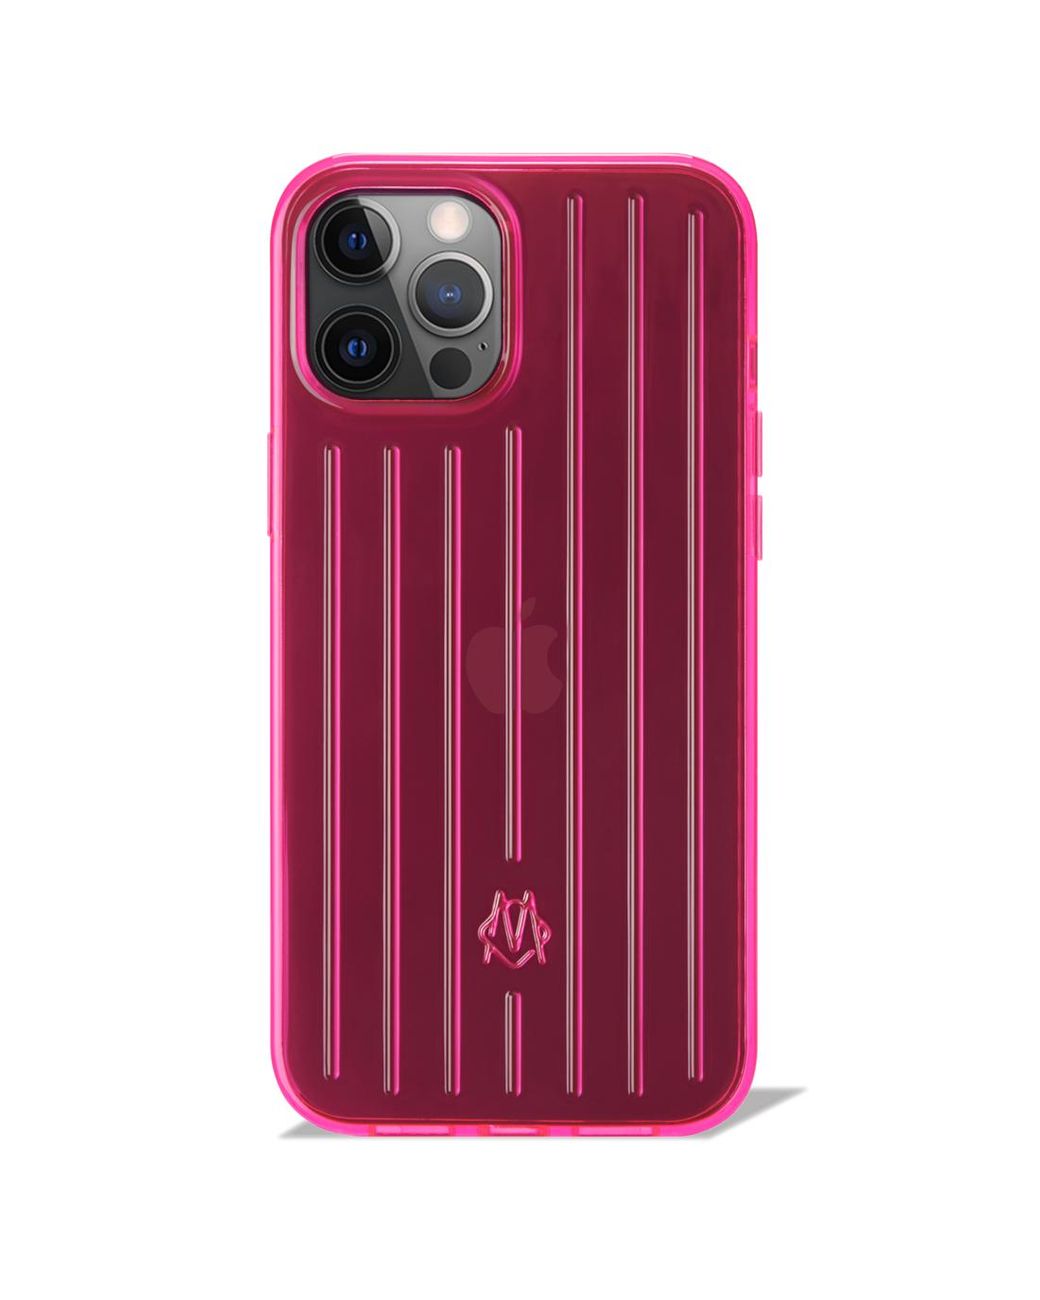 RIMOWA Neon Pink Case For Iphone 12 & 12 Pro | Lyst